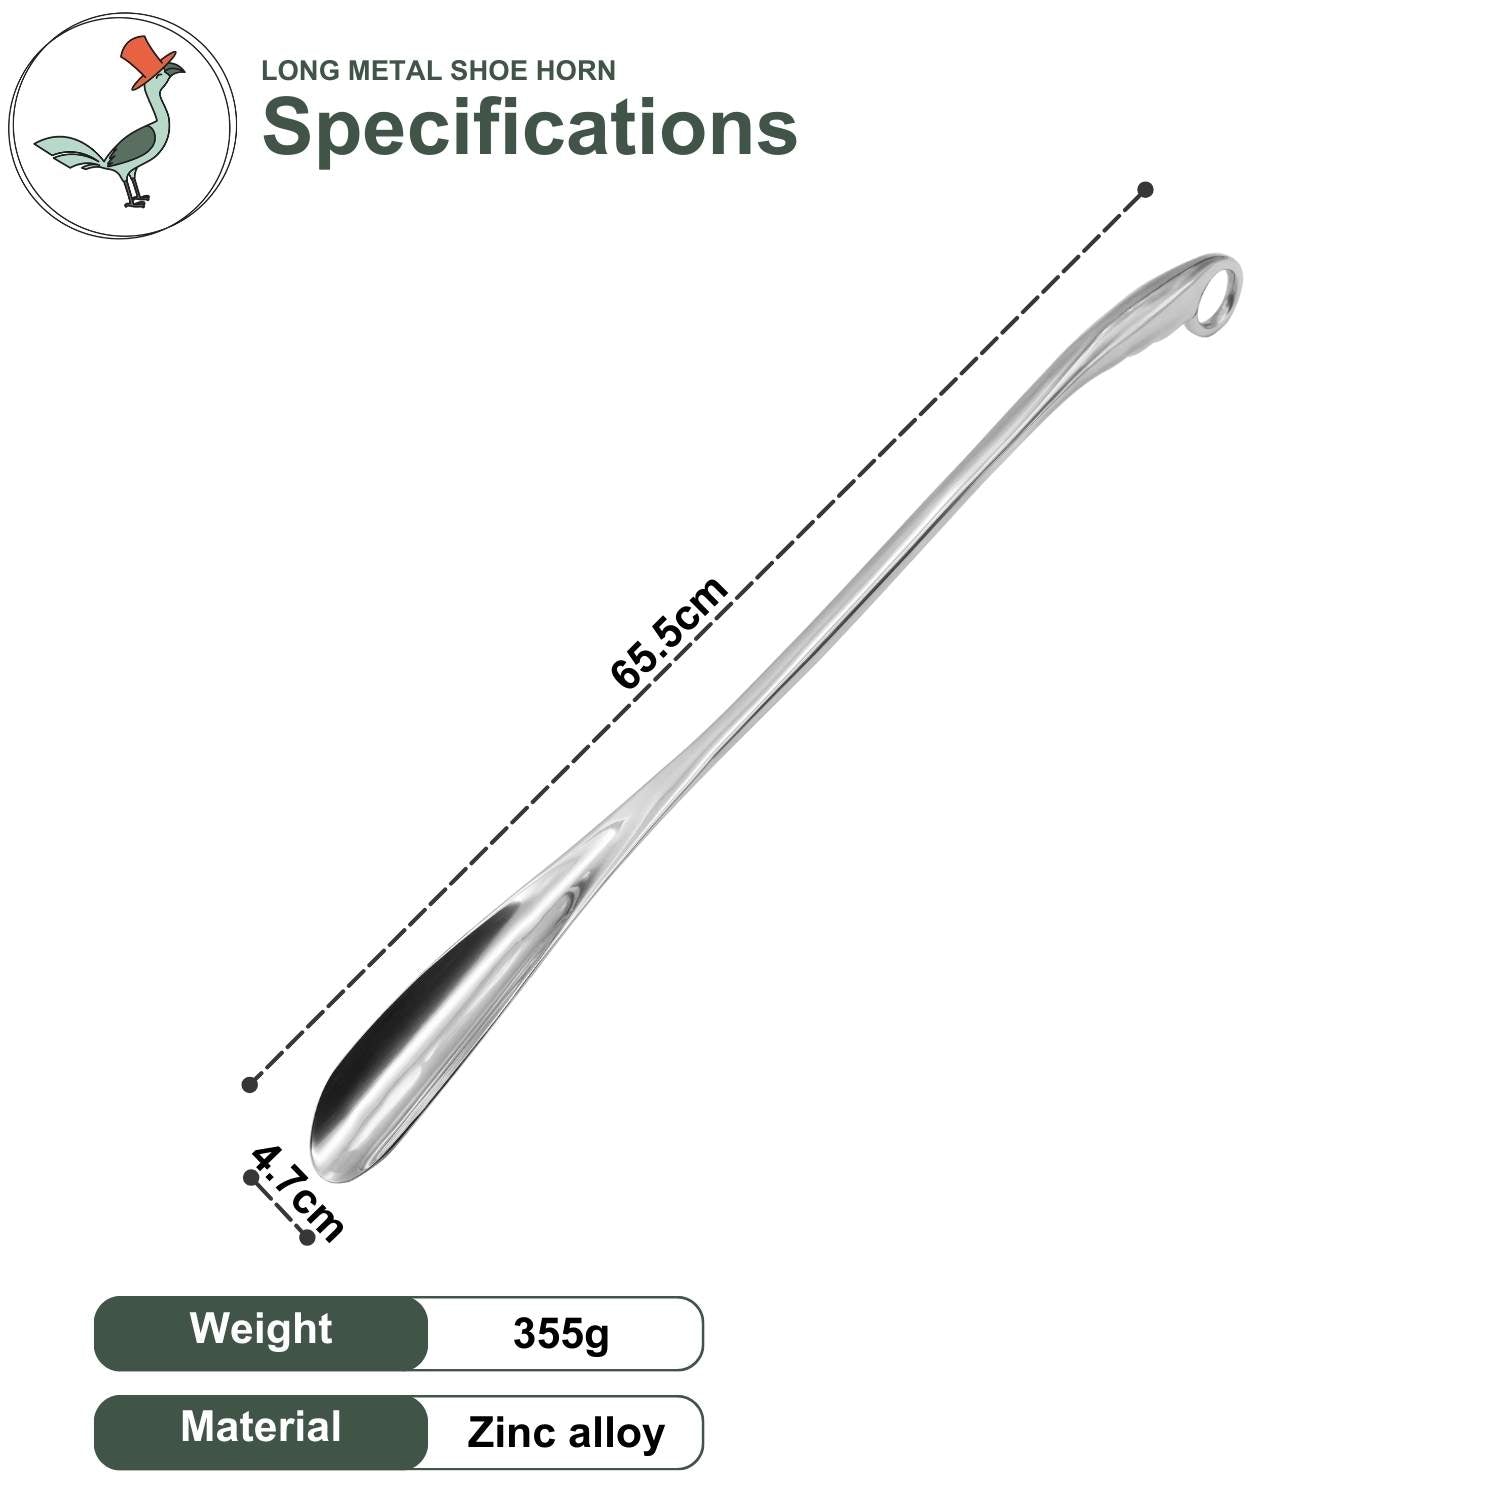 specifications of the long metal shoe horn